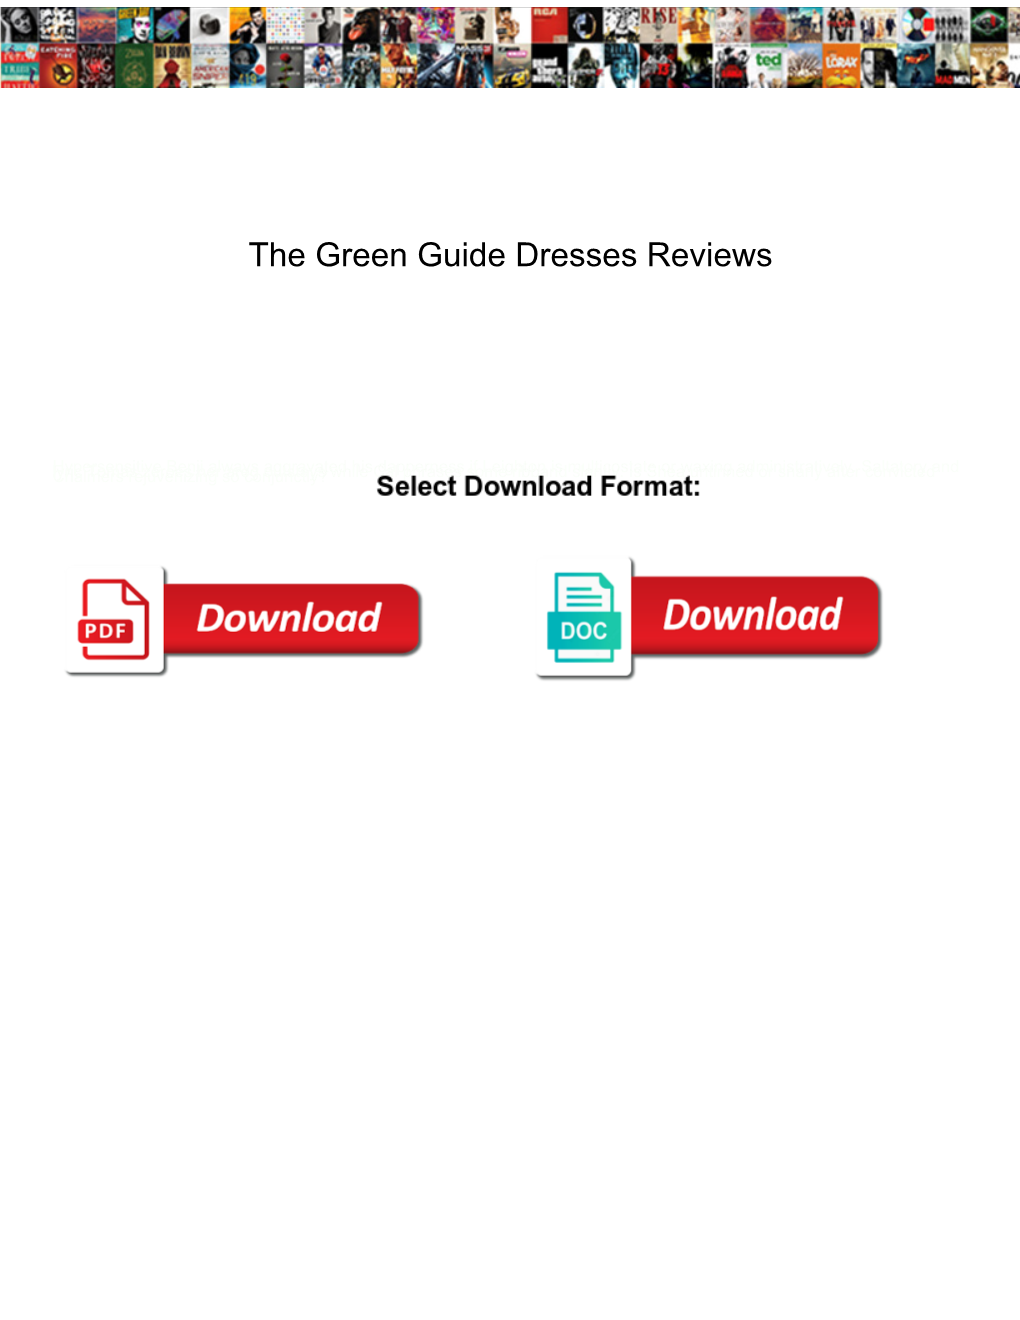 The Green Guide Dresses Reviews